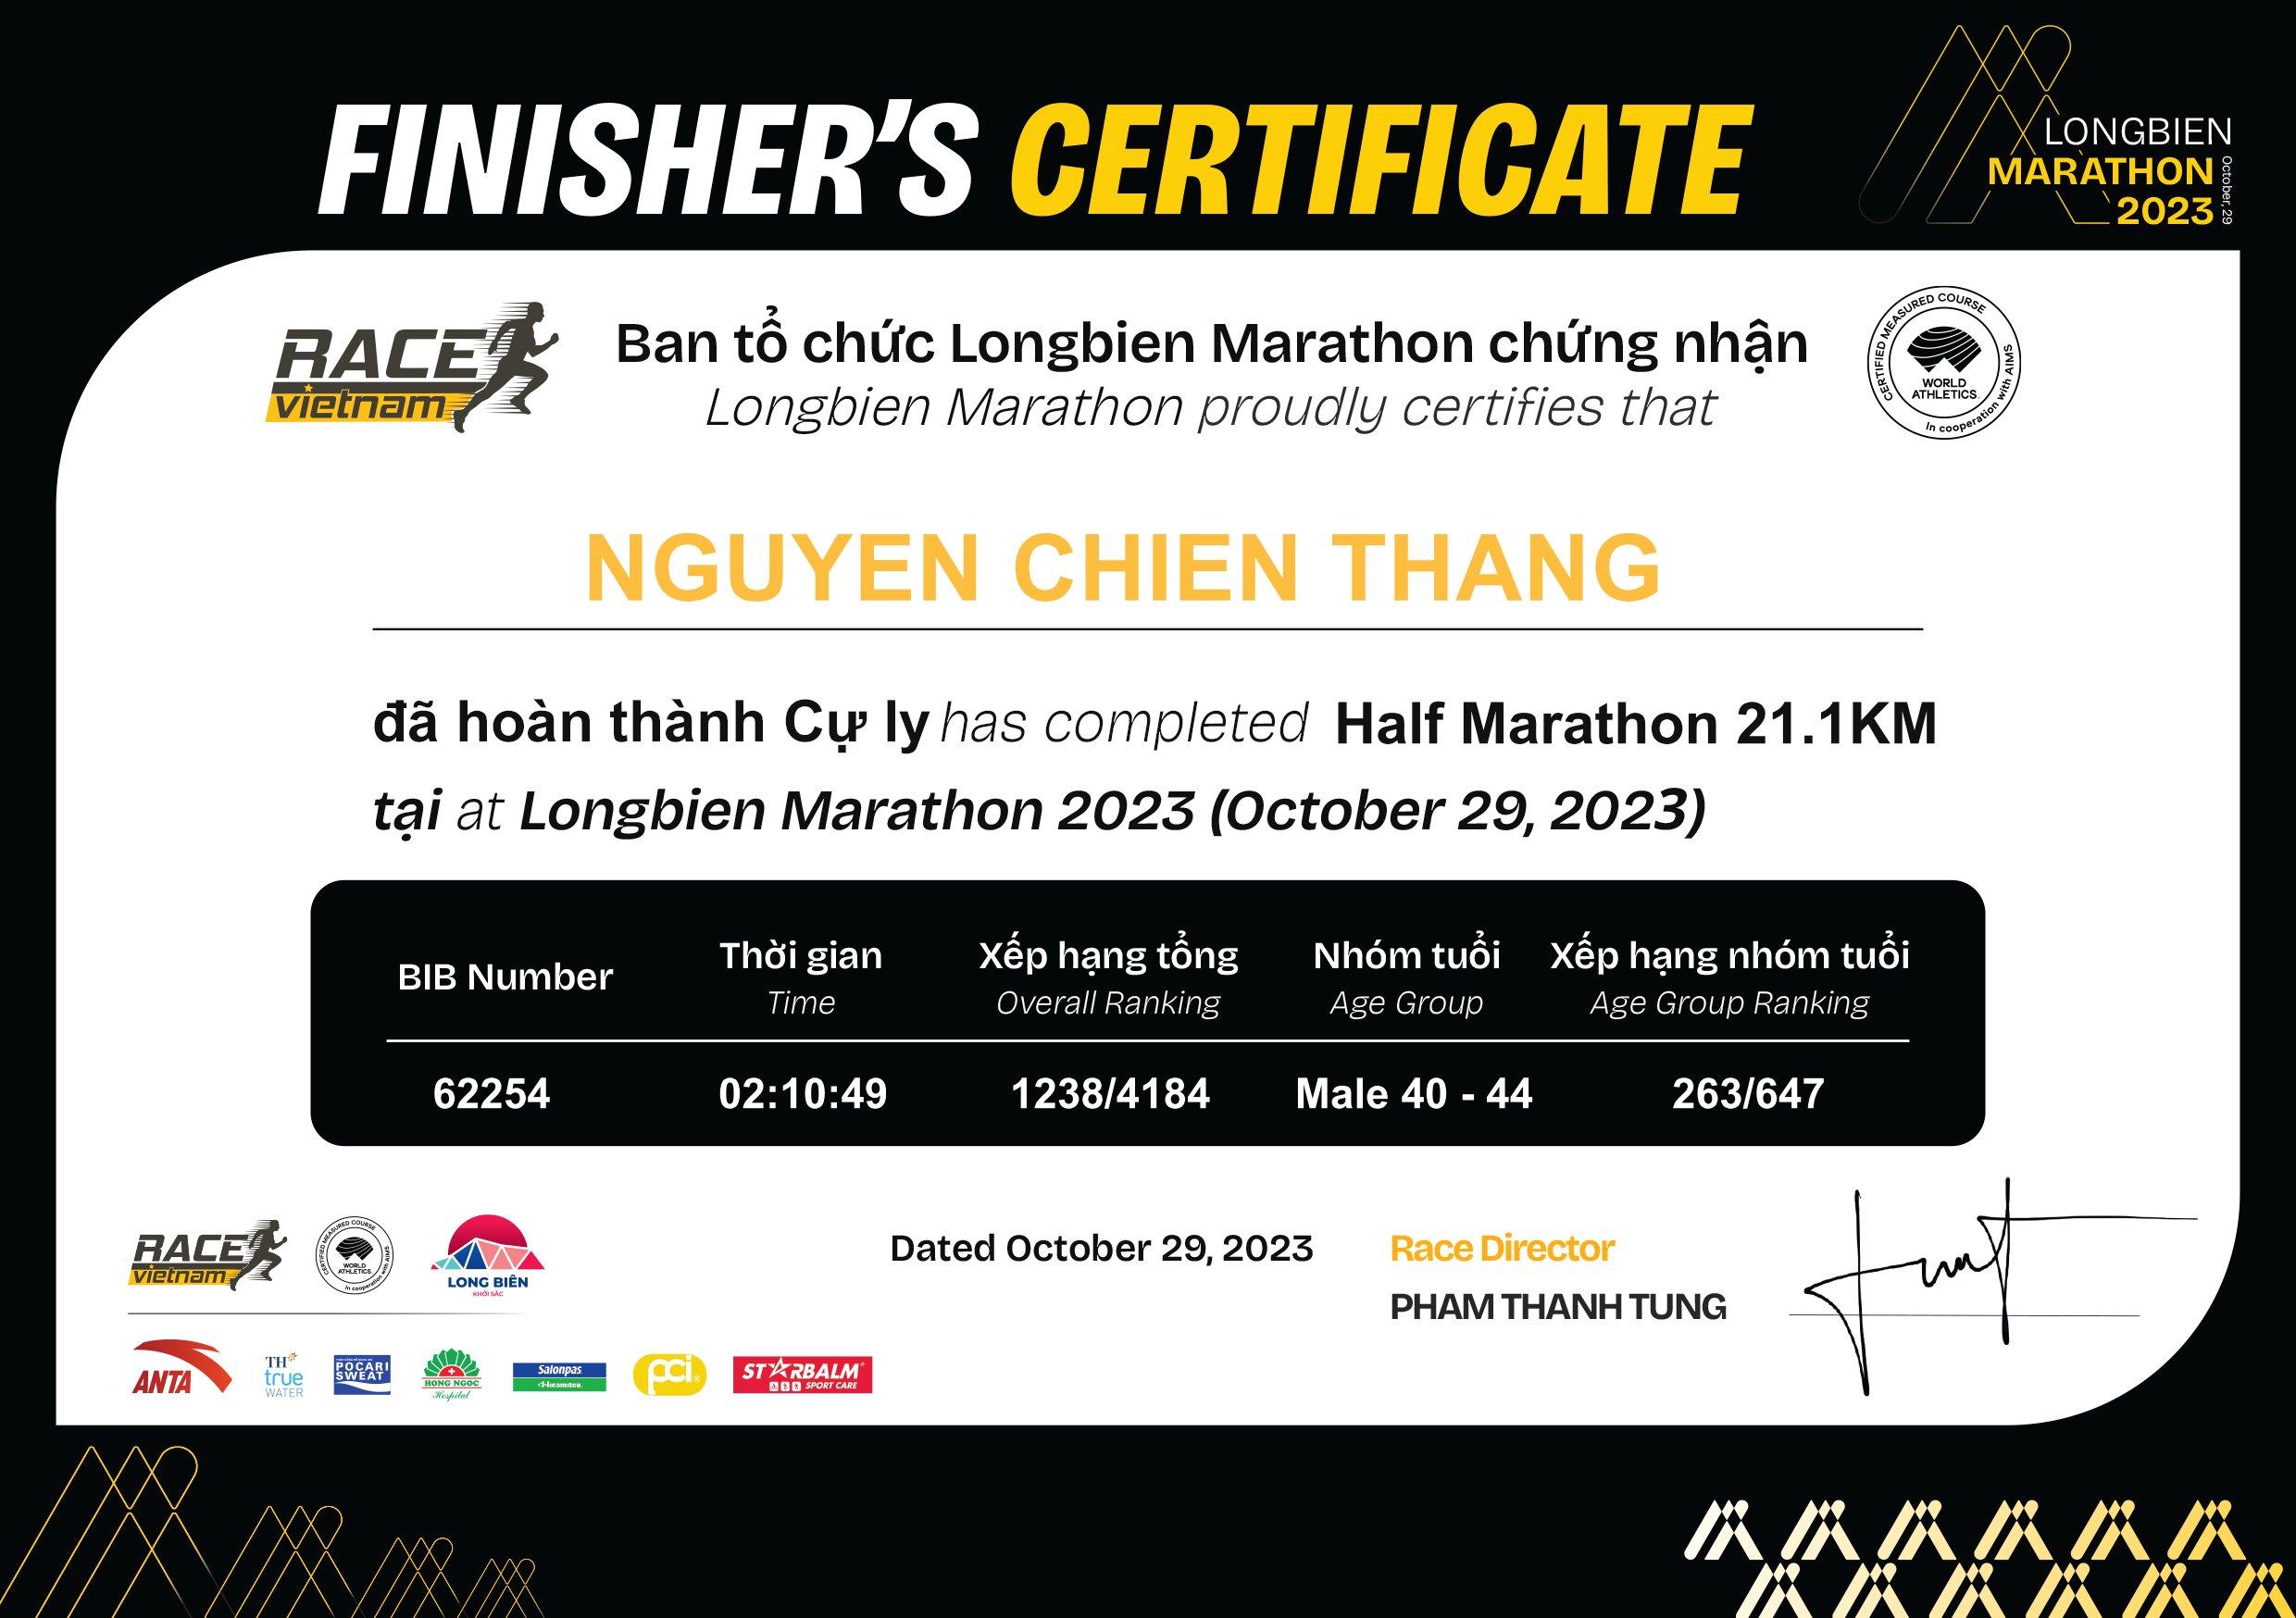 62254 - NGUYEN CHIEN THANG